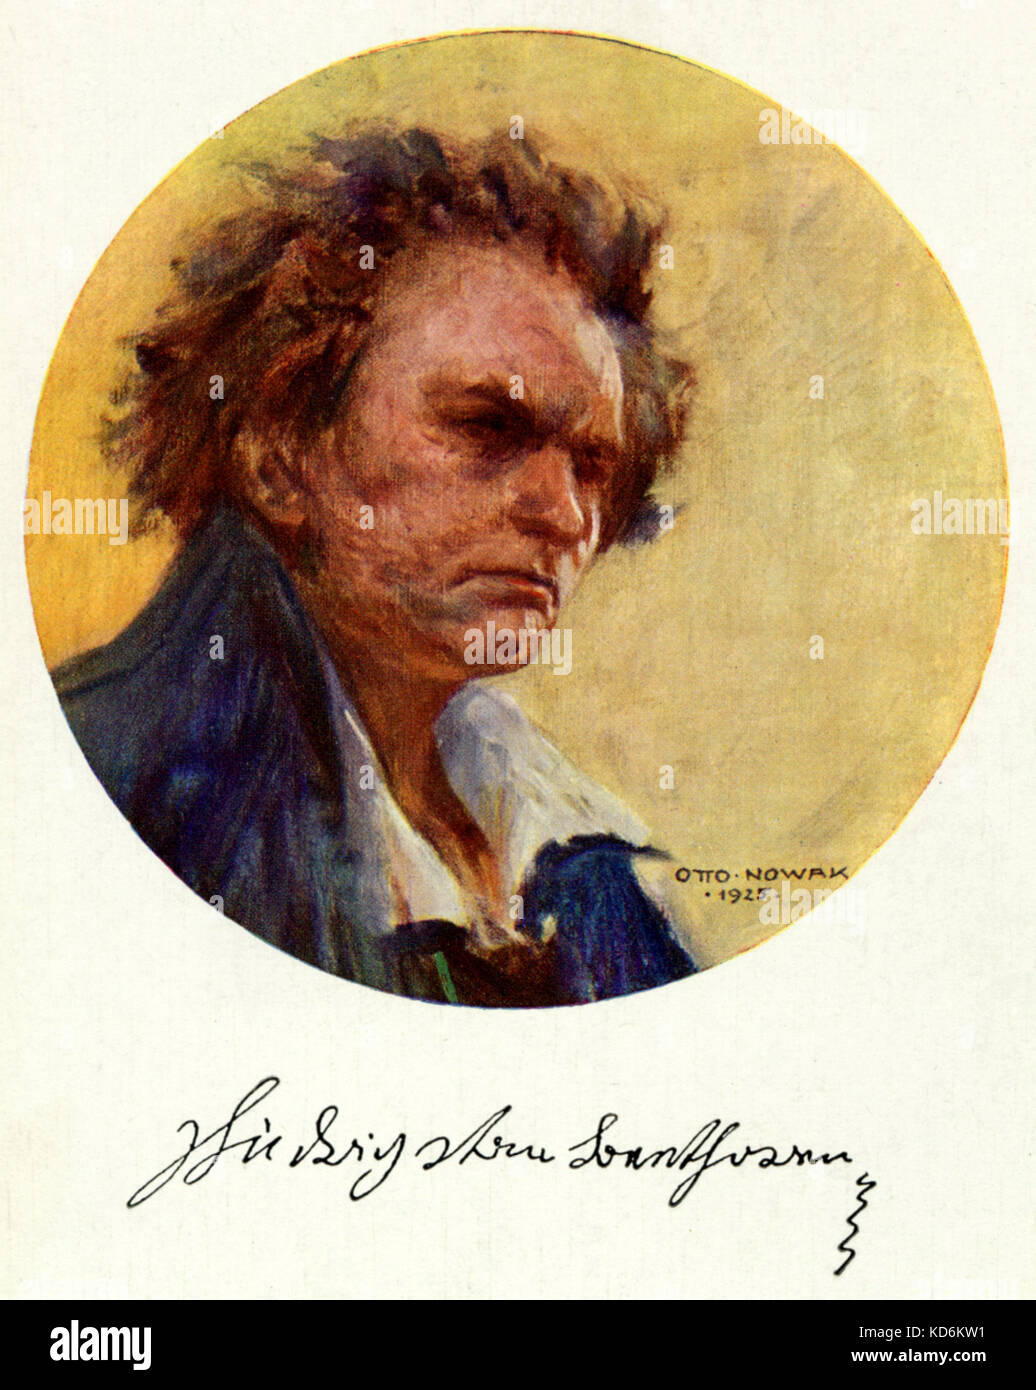 Ludwig van Beethoven - portrait by Otto Nowak, 1925. Postcard with Beethoven's signature. LvB, German composer: 1770 - 1827. ON, painter: 1874 -1945. Stock Photo